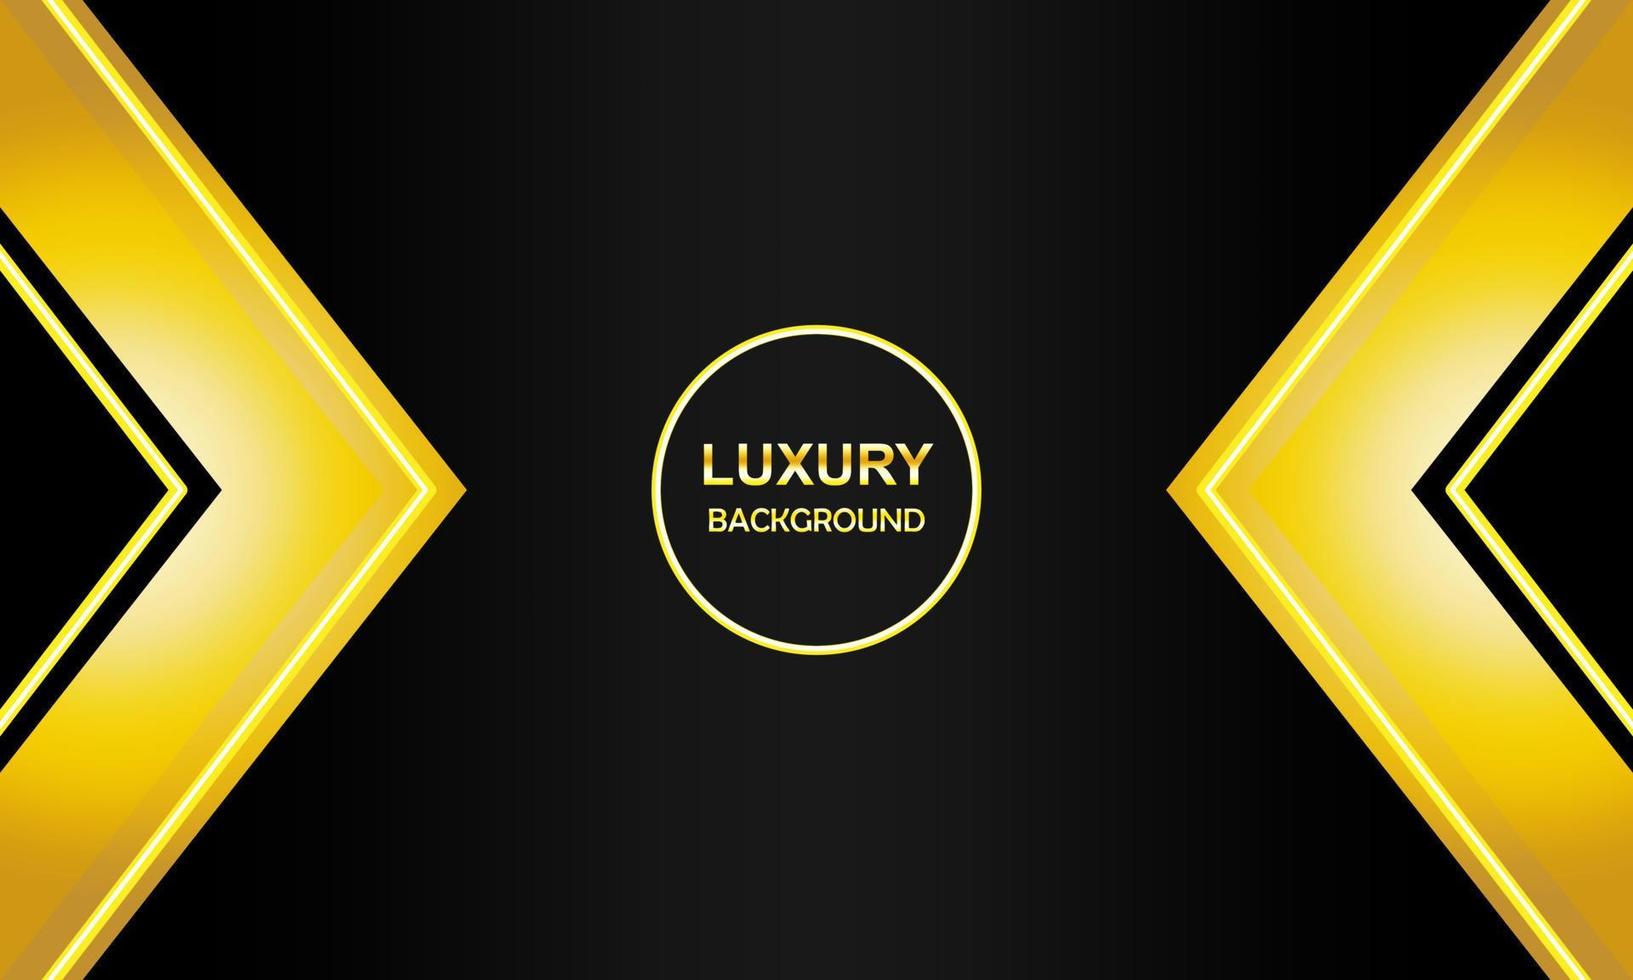 Luxury background, golden triangle with futuristic yellow glowing effect, abstract geometric design vector